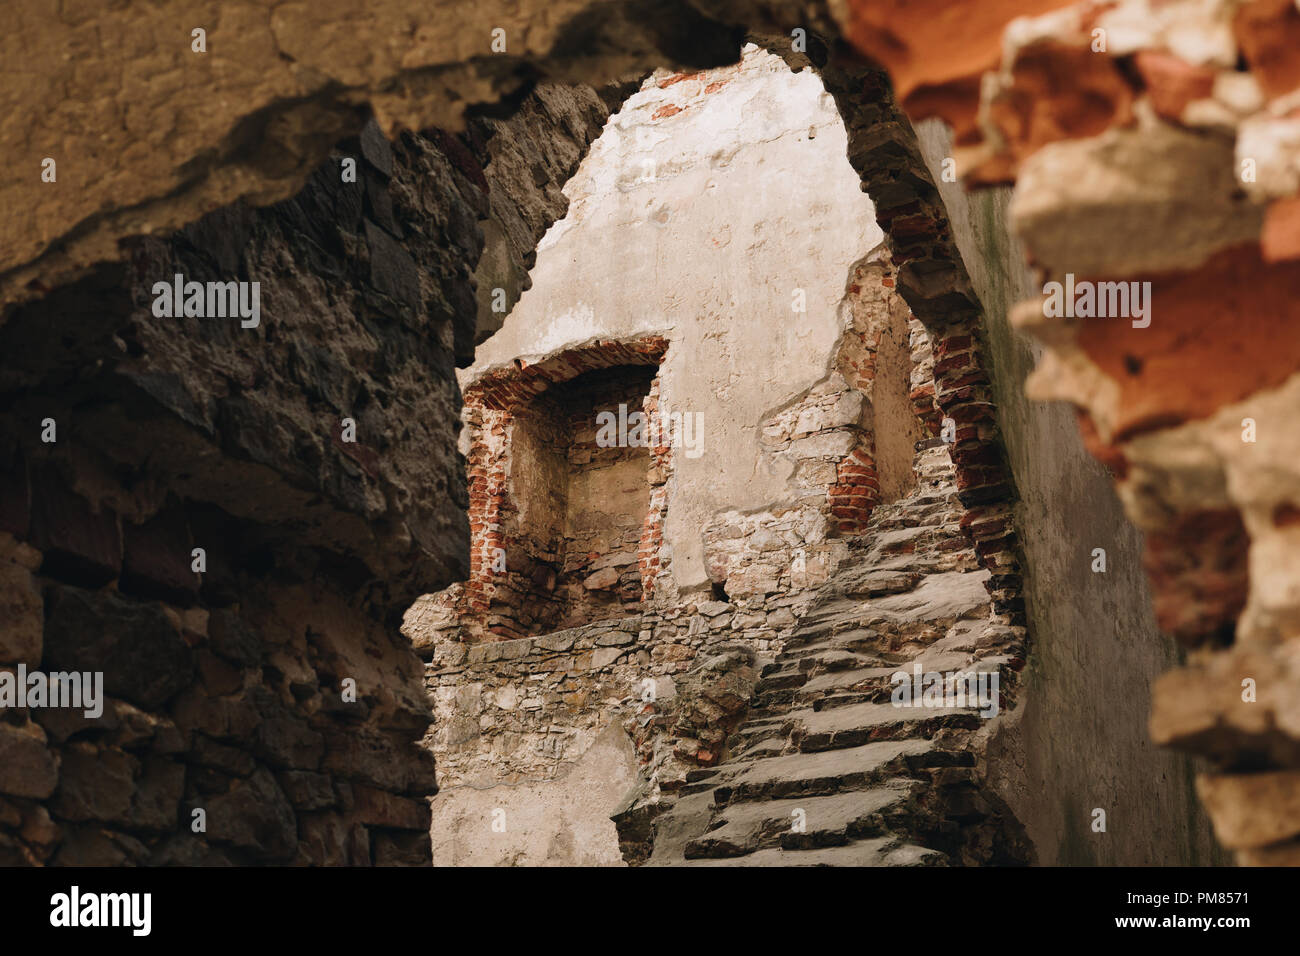 august 2018, ujazd village, poland: stairs inside of ruins of old polish castle called krzyztopor Stock Photo